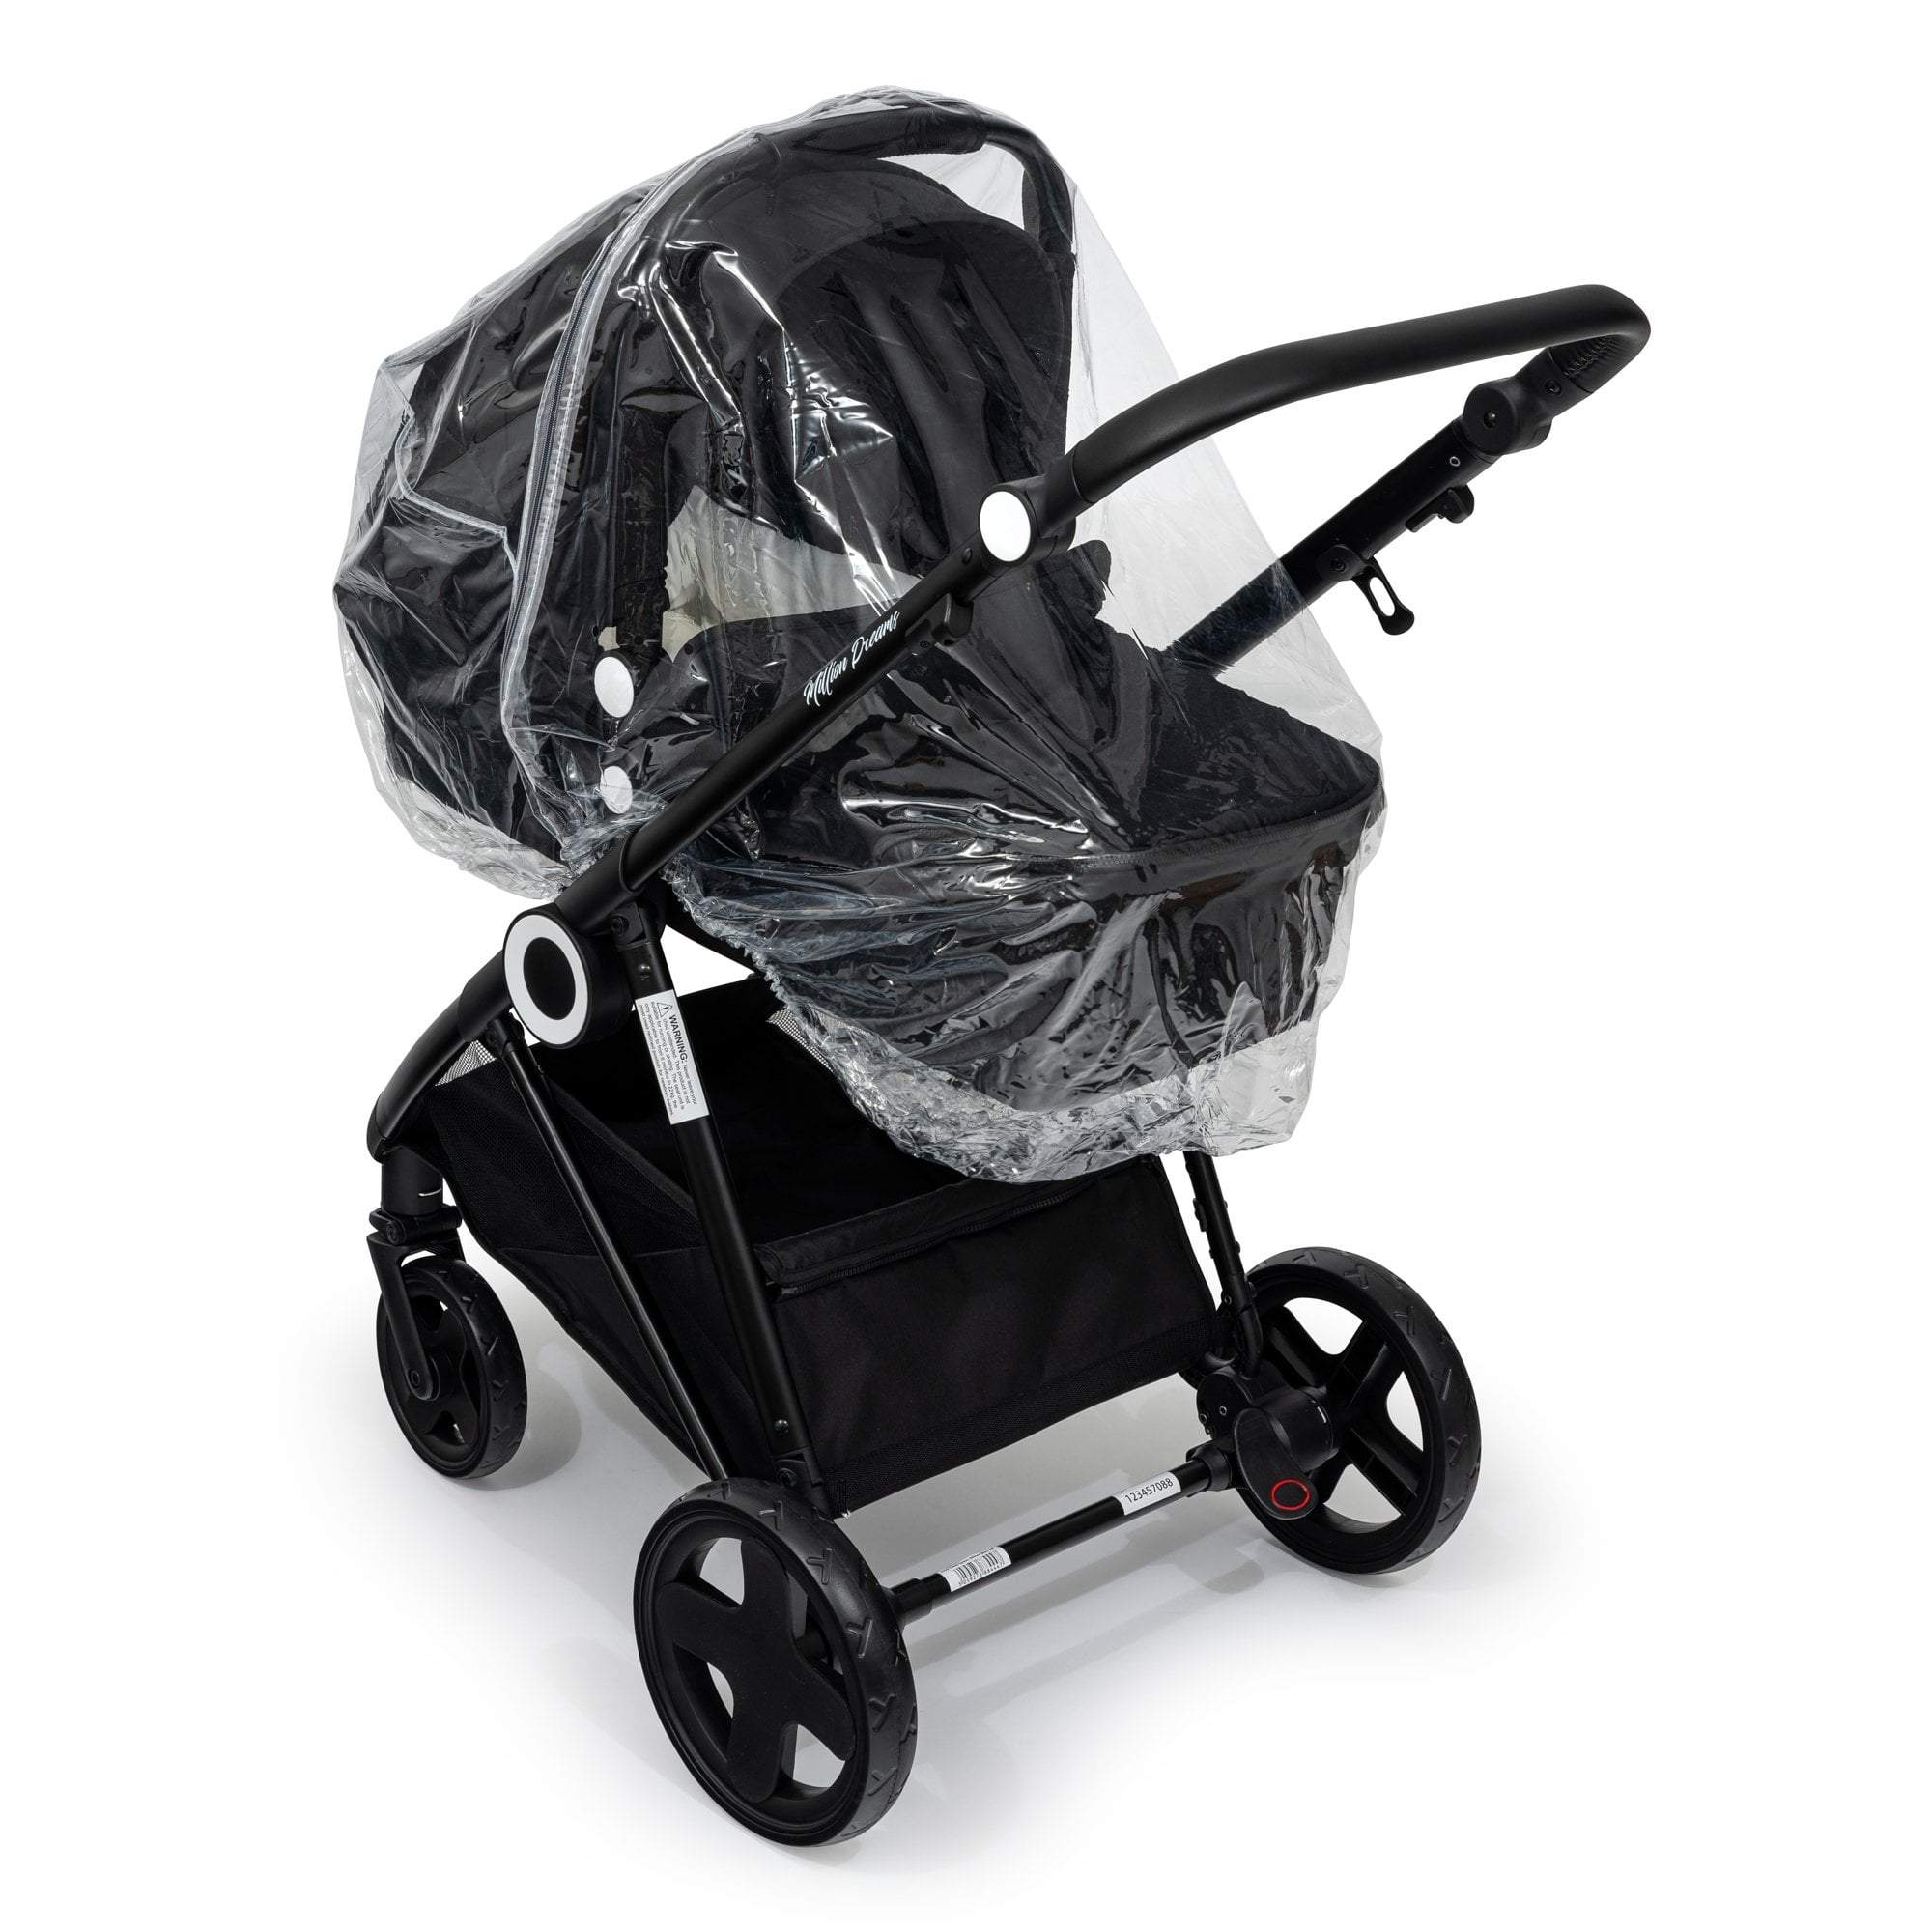 Carrycot Raincover Compatible With Excel - Fits All Models - For Your Little One